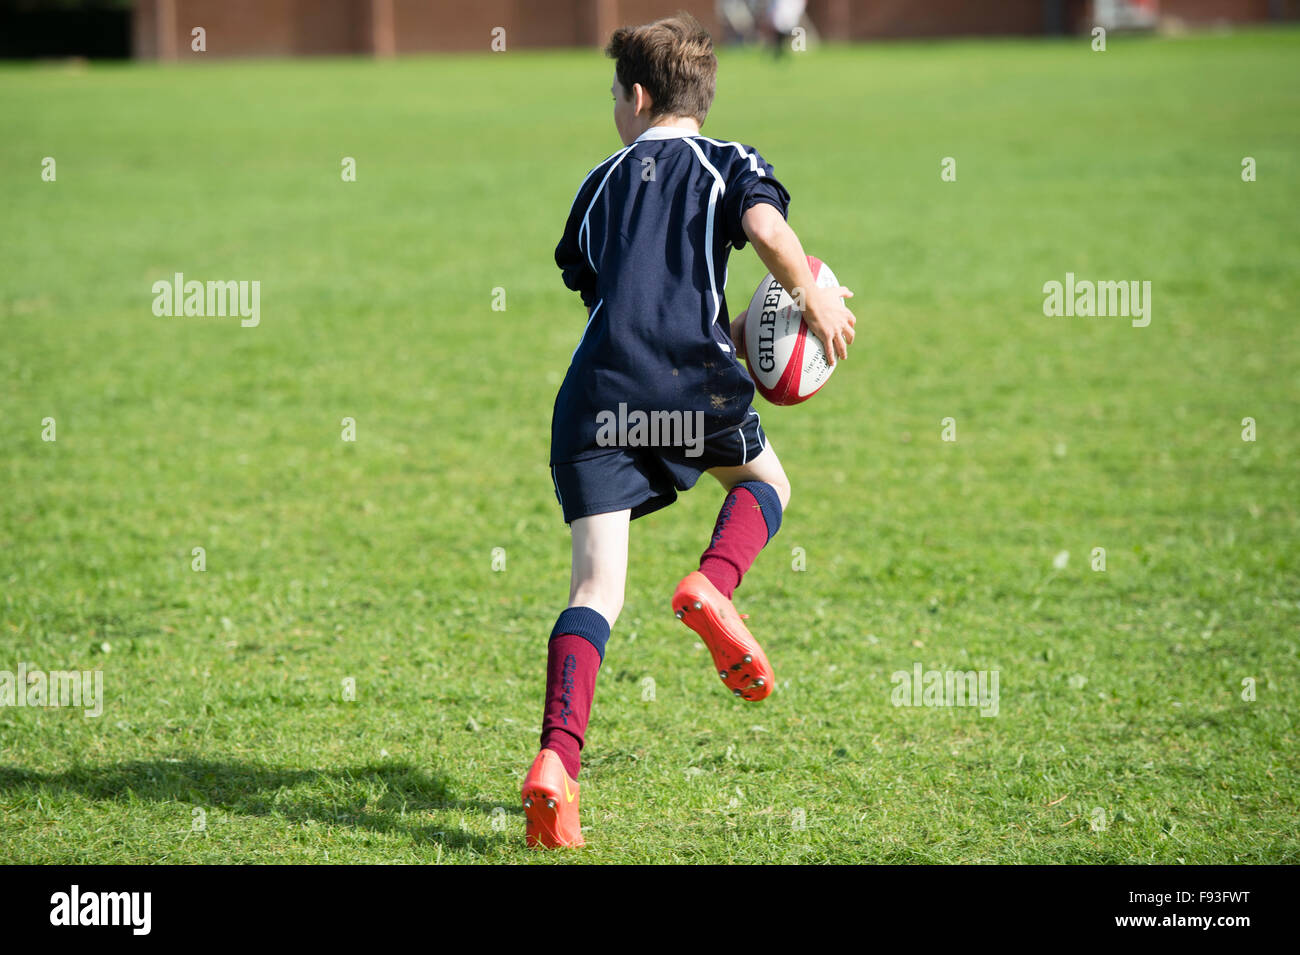 Secondary education Wales UK: physical education lesson - a teenage boy playing rugby on a school games pitch field. Stock Photo